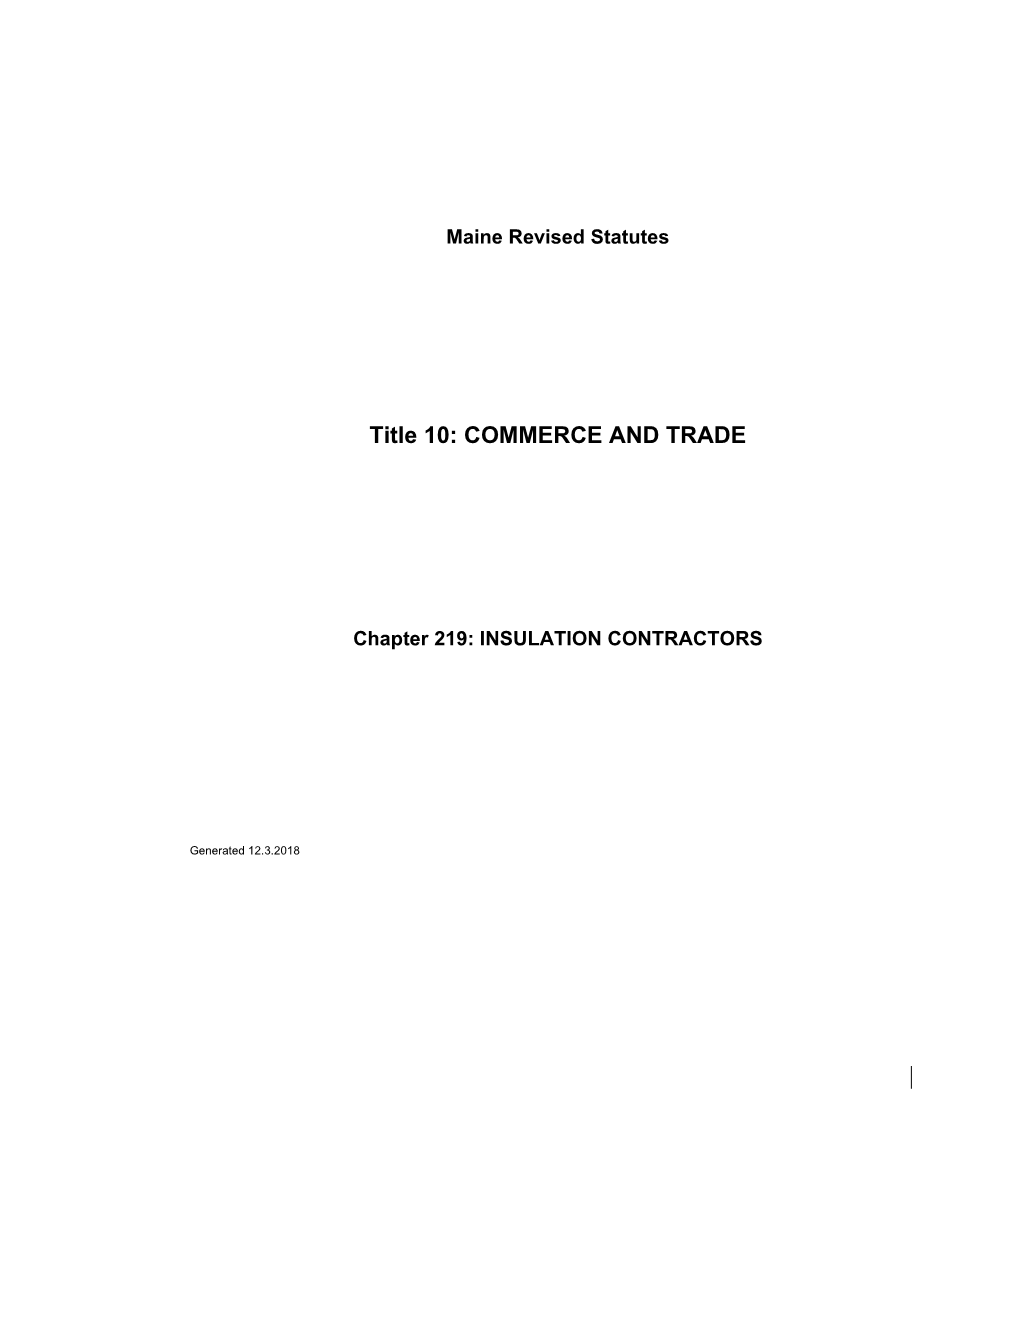 MRS Title 10 1482. RESIDENTIAL INSULATION CONTRACT